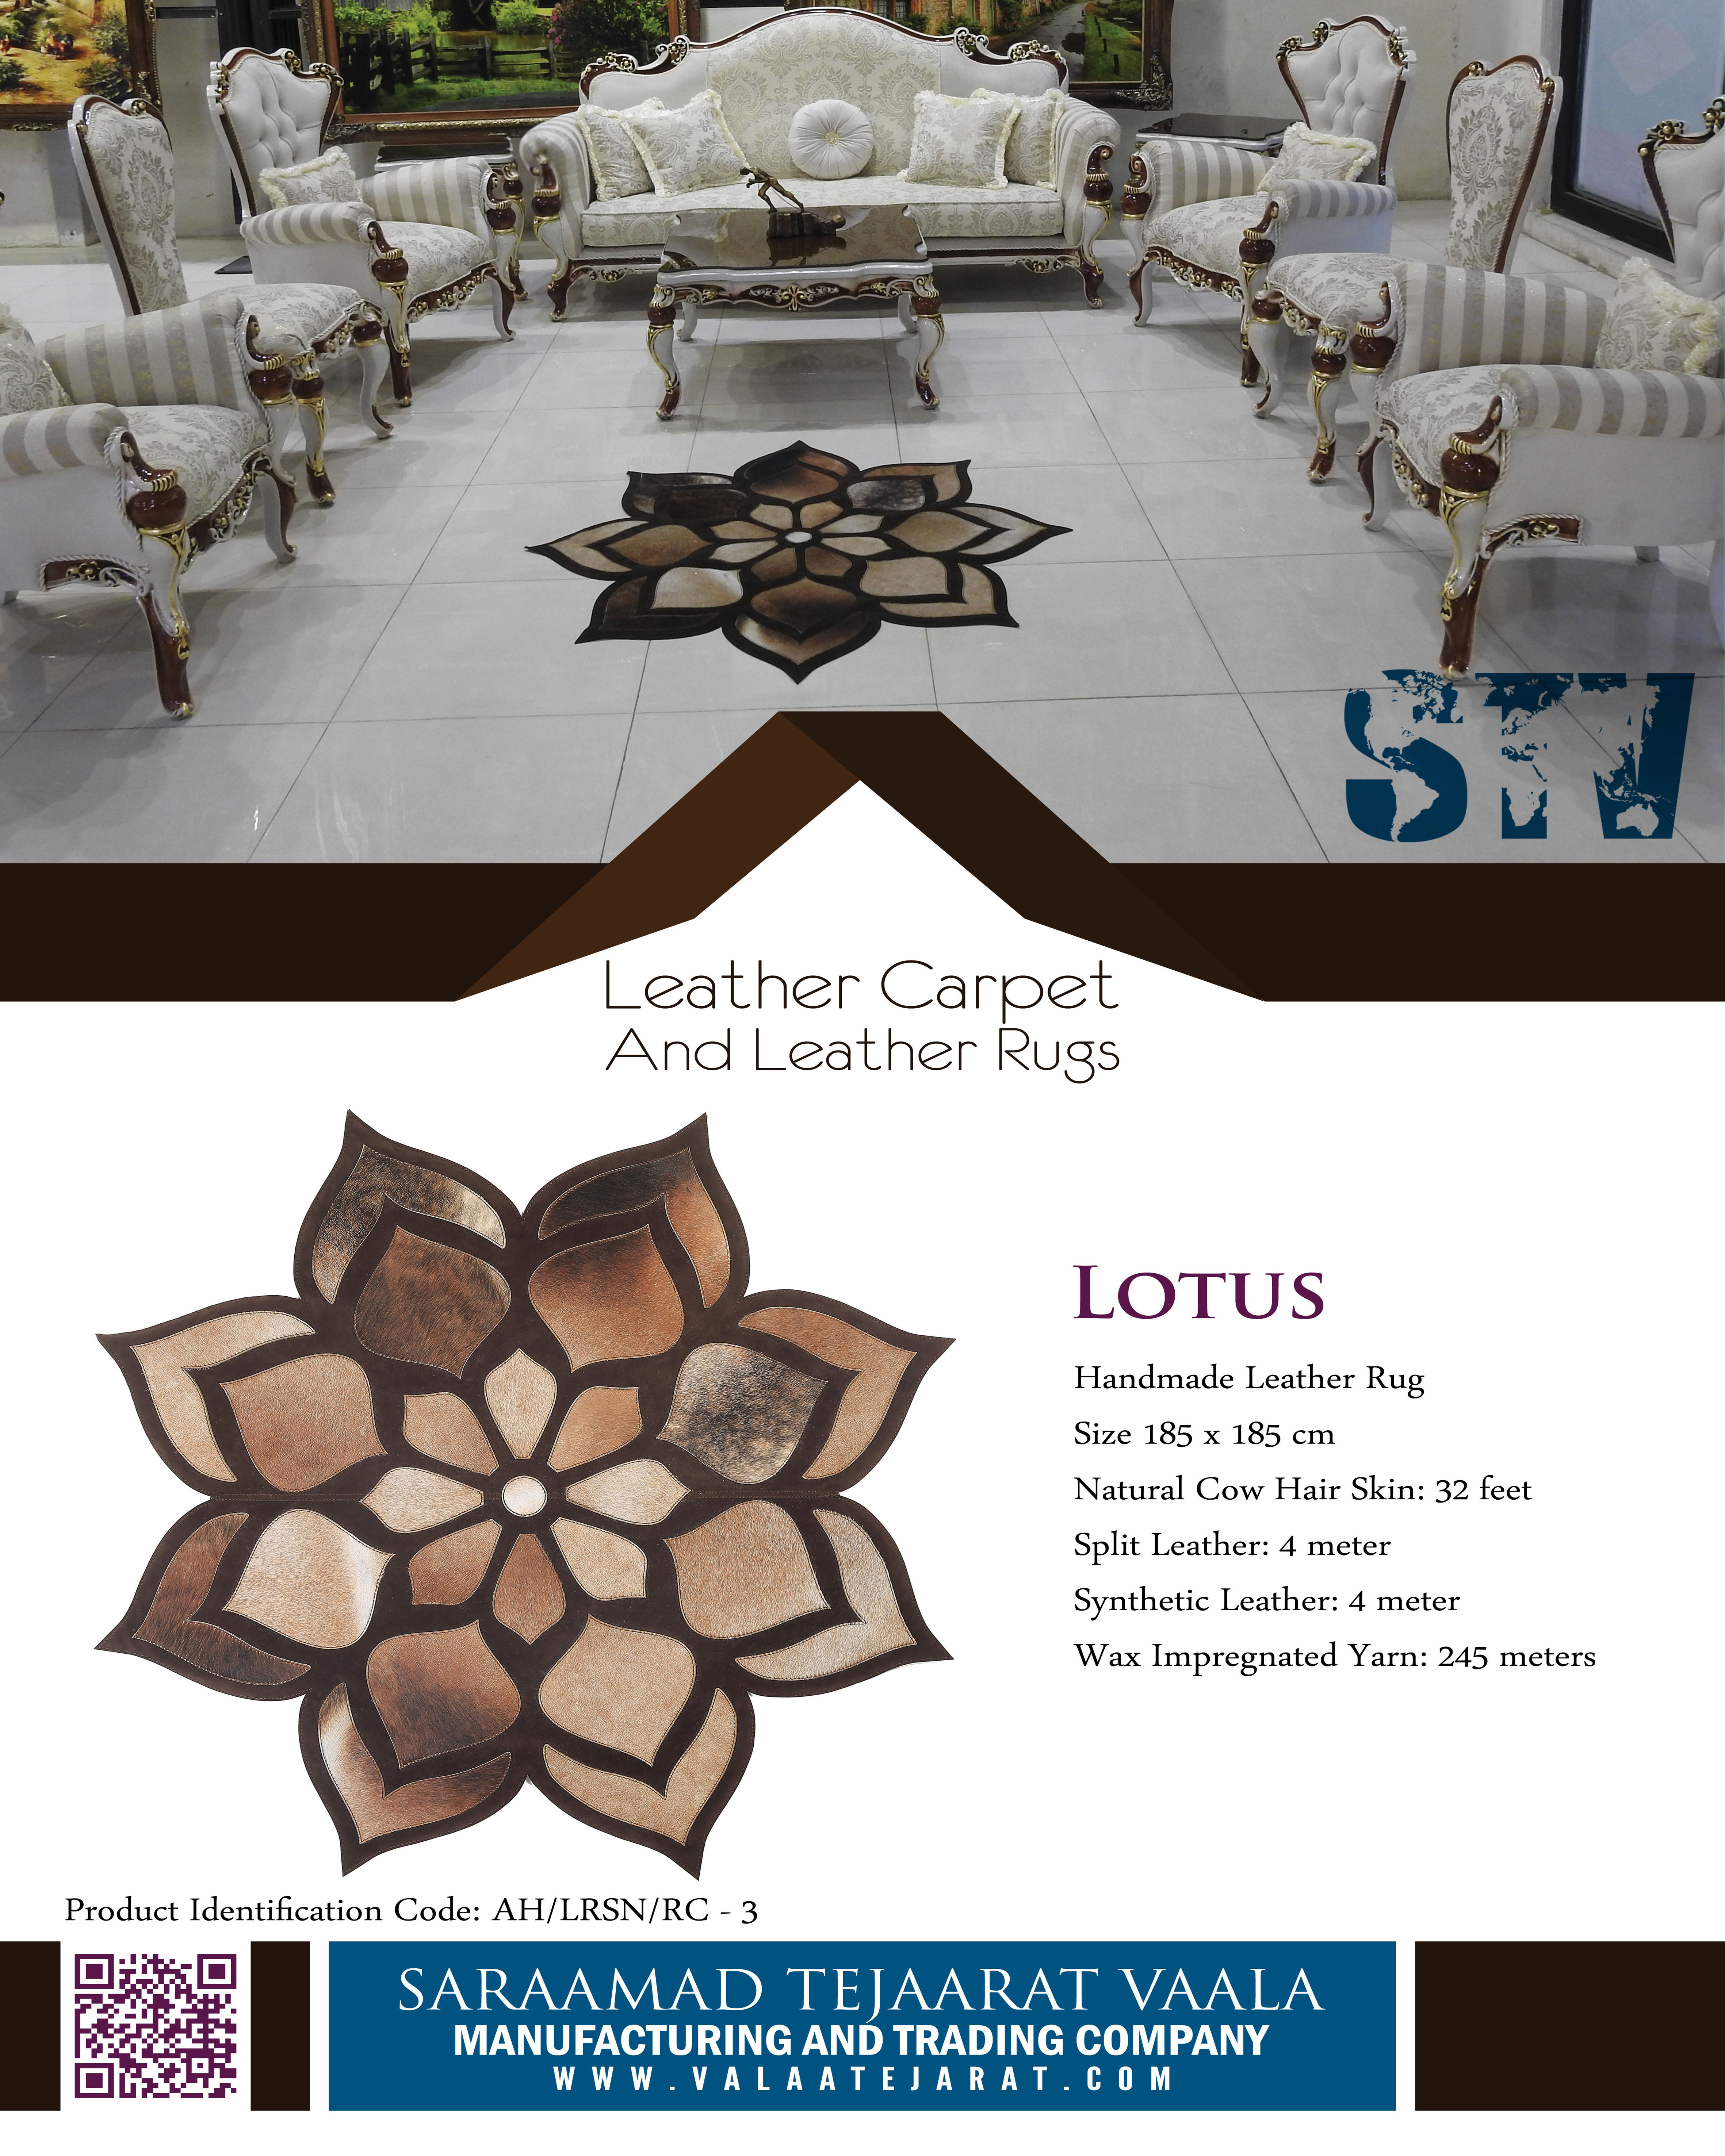 Leather rugs and carpets